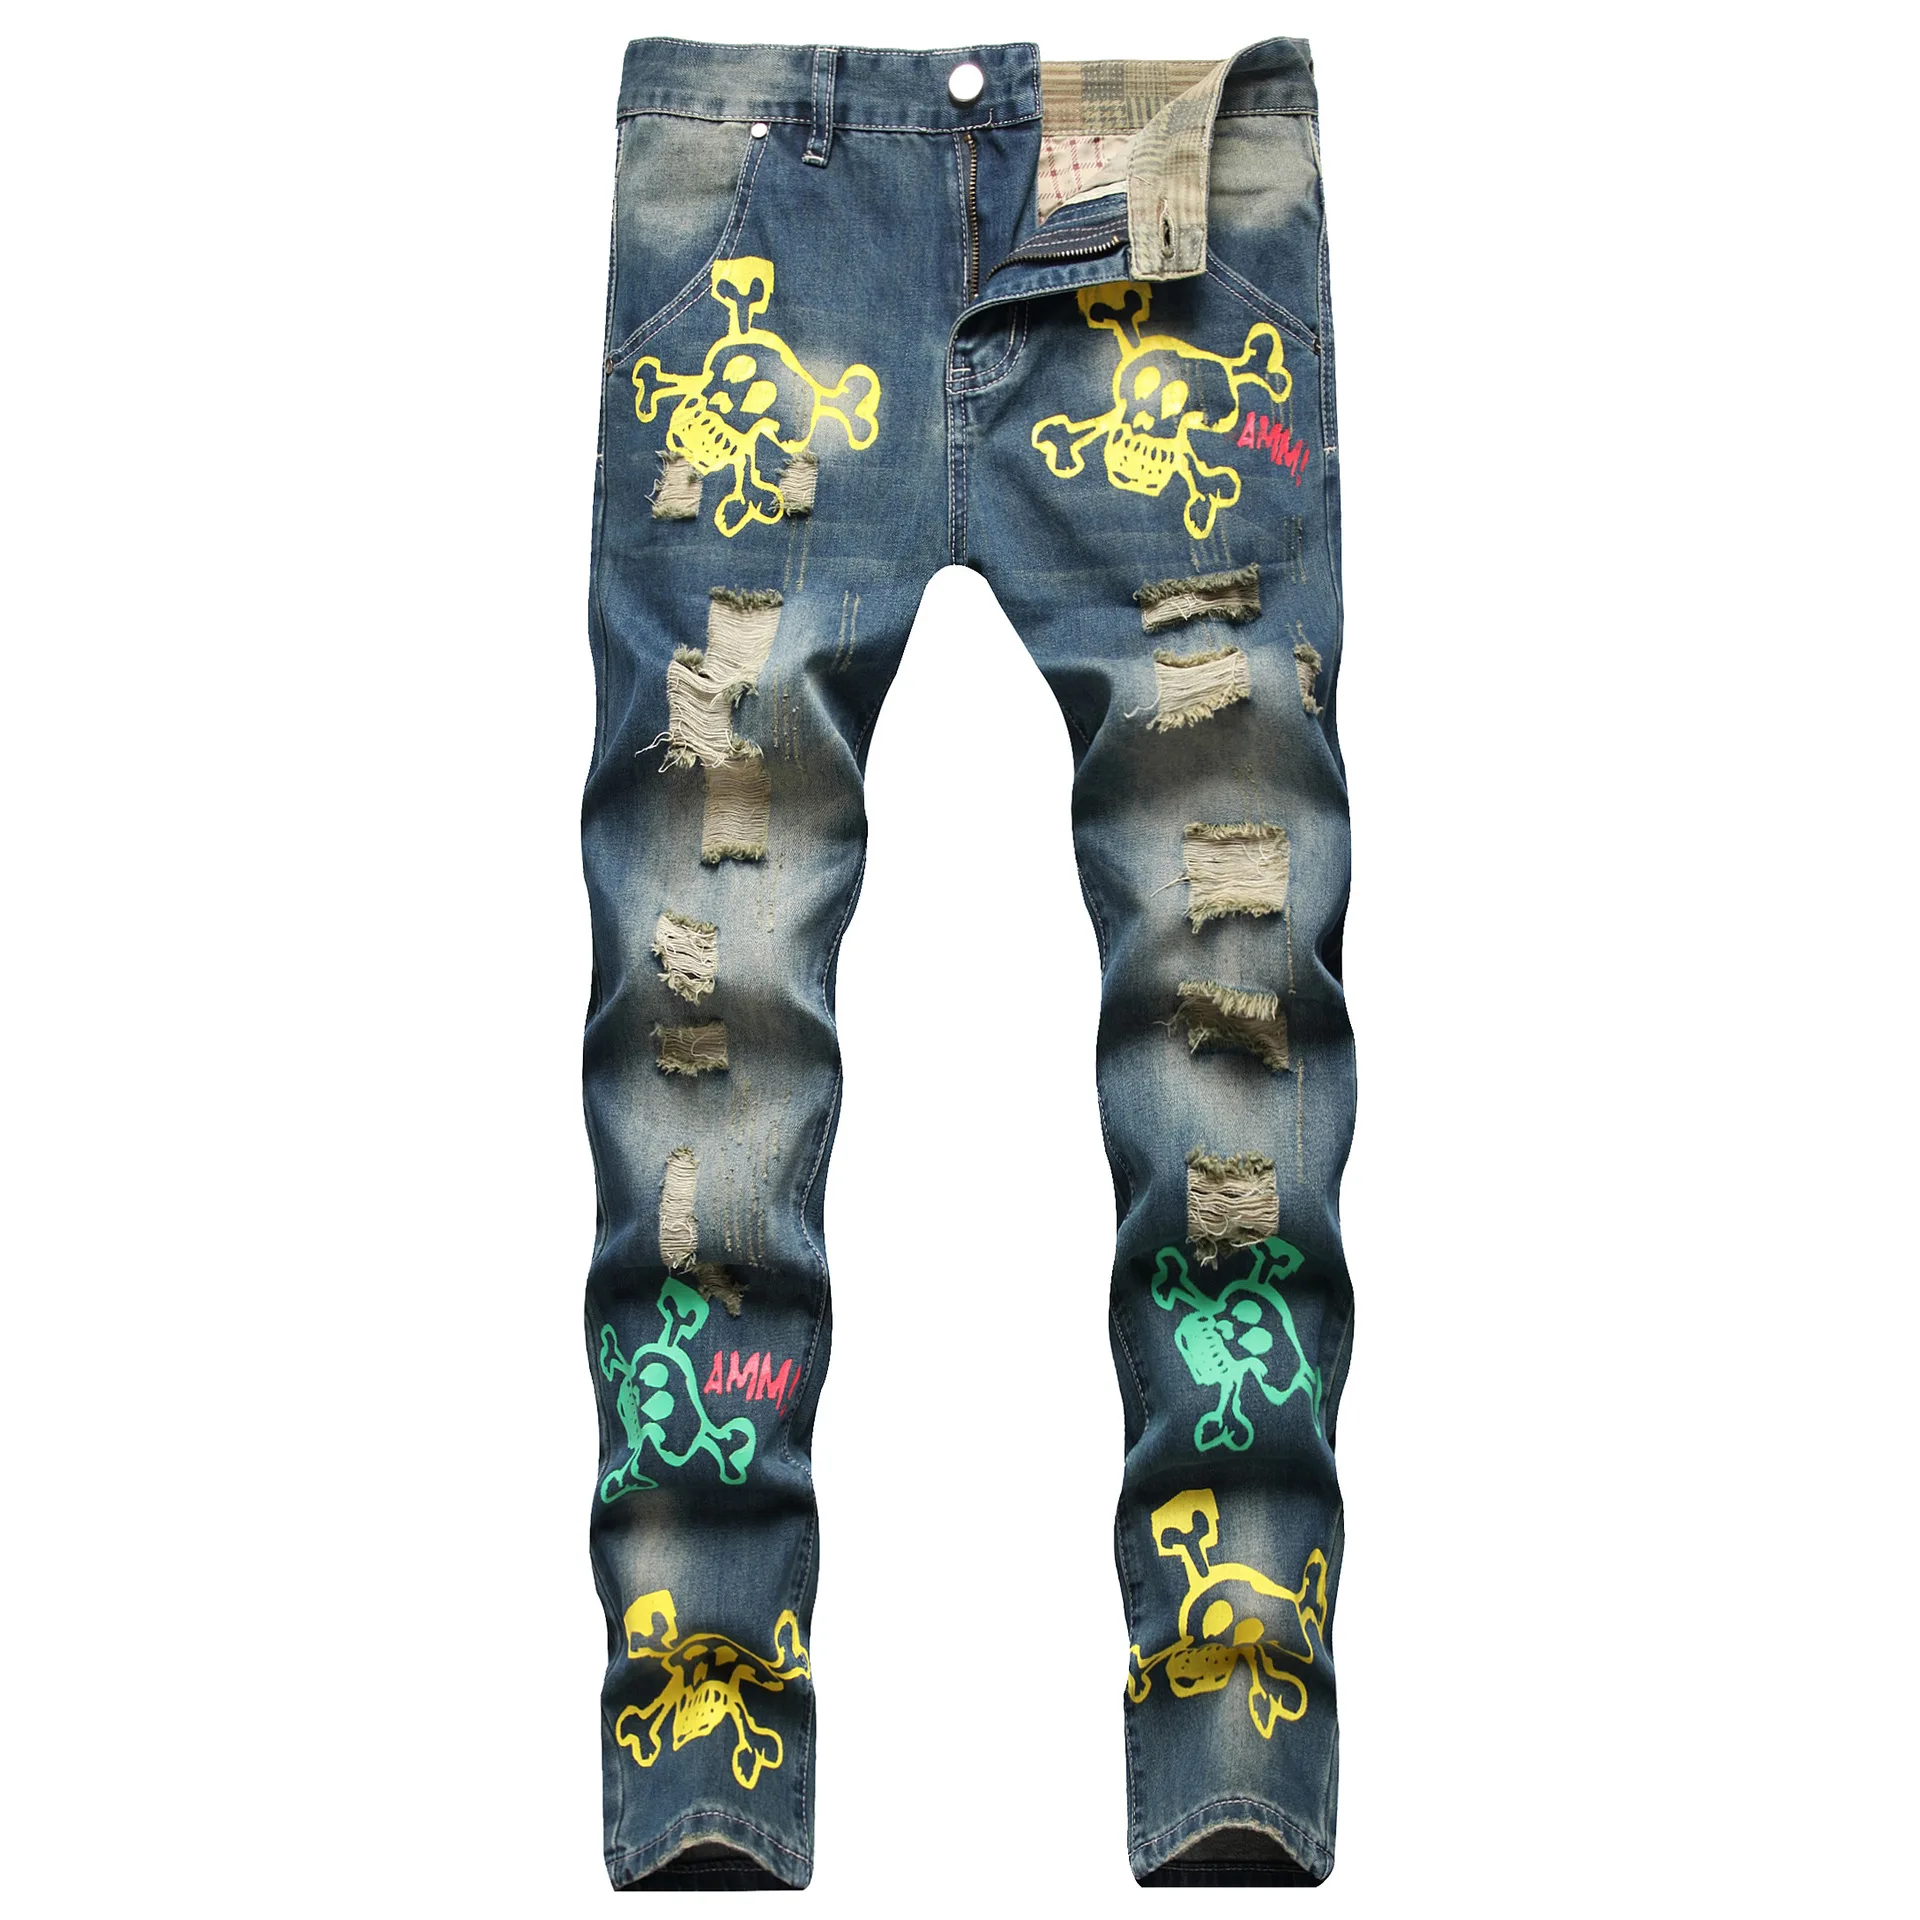 Mens New Fashion Ripped Beggar Jeans Vintage Skull Printed Mannen Jeans Slim Fit Stretch Man Casual Hole Denim Pants Ropa Hombre